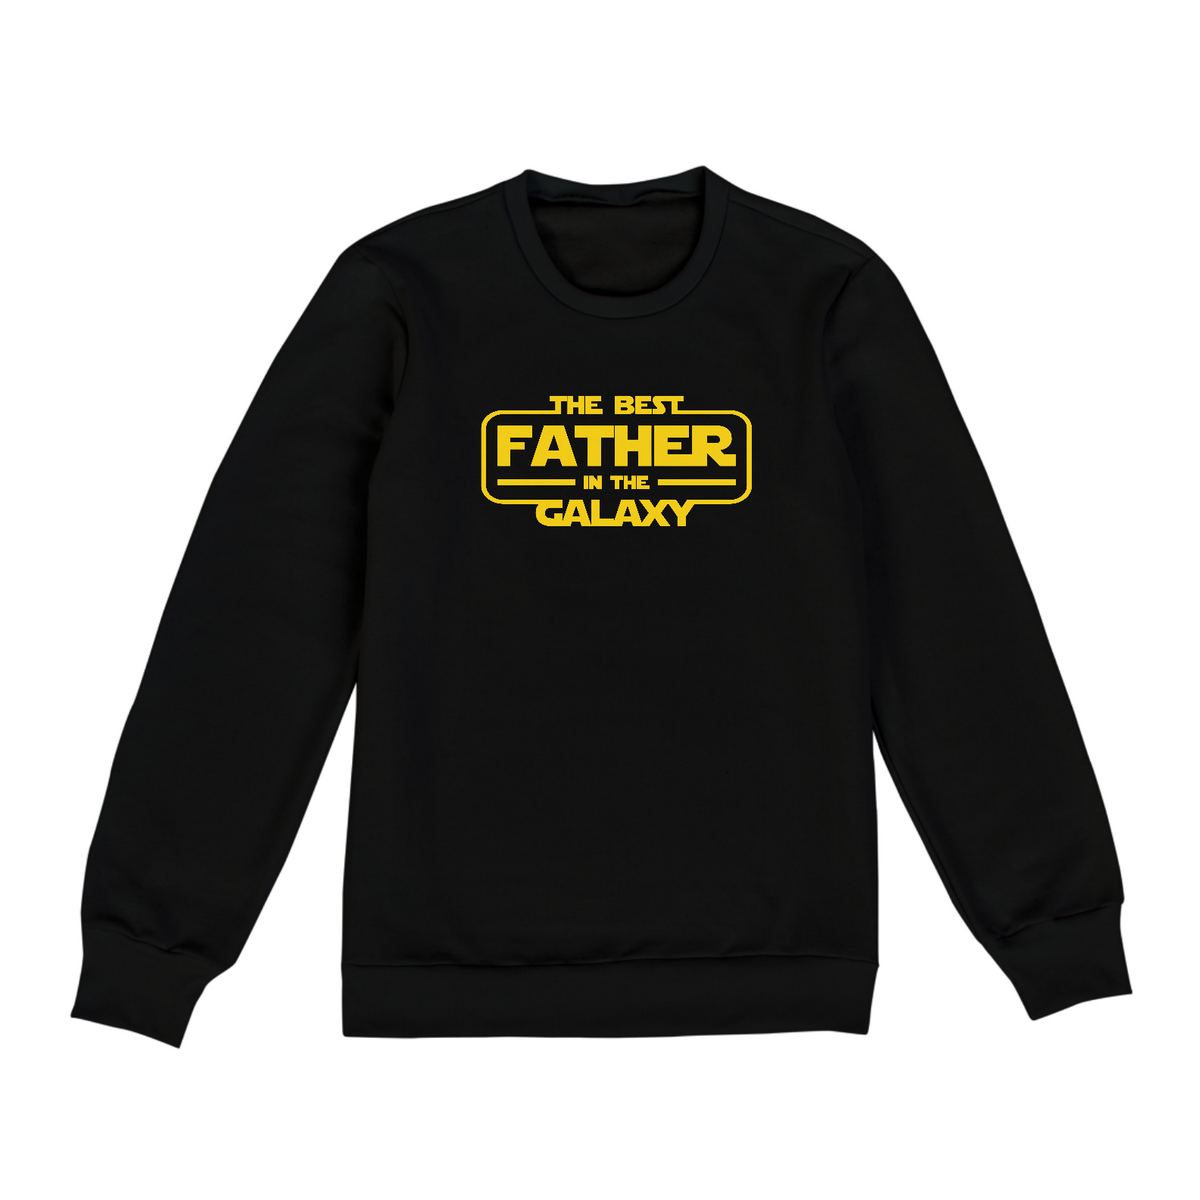 Nome do produto: Moletom Geek The Best Father in Galaxy